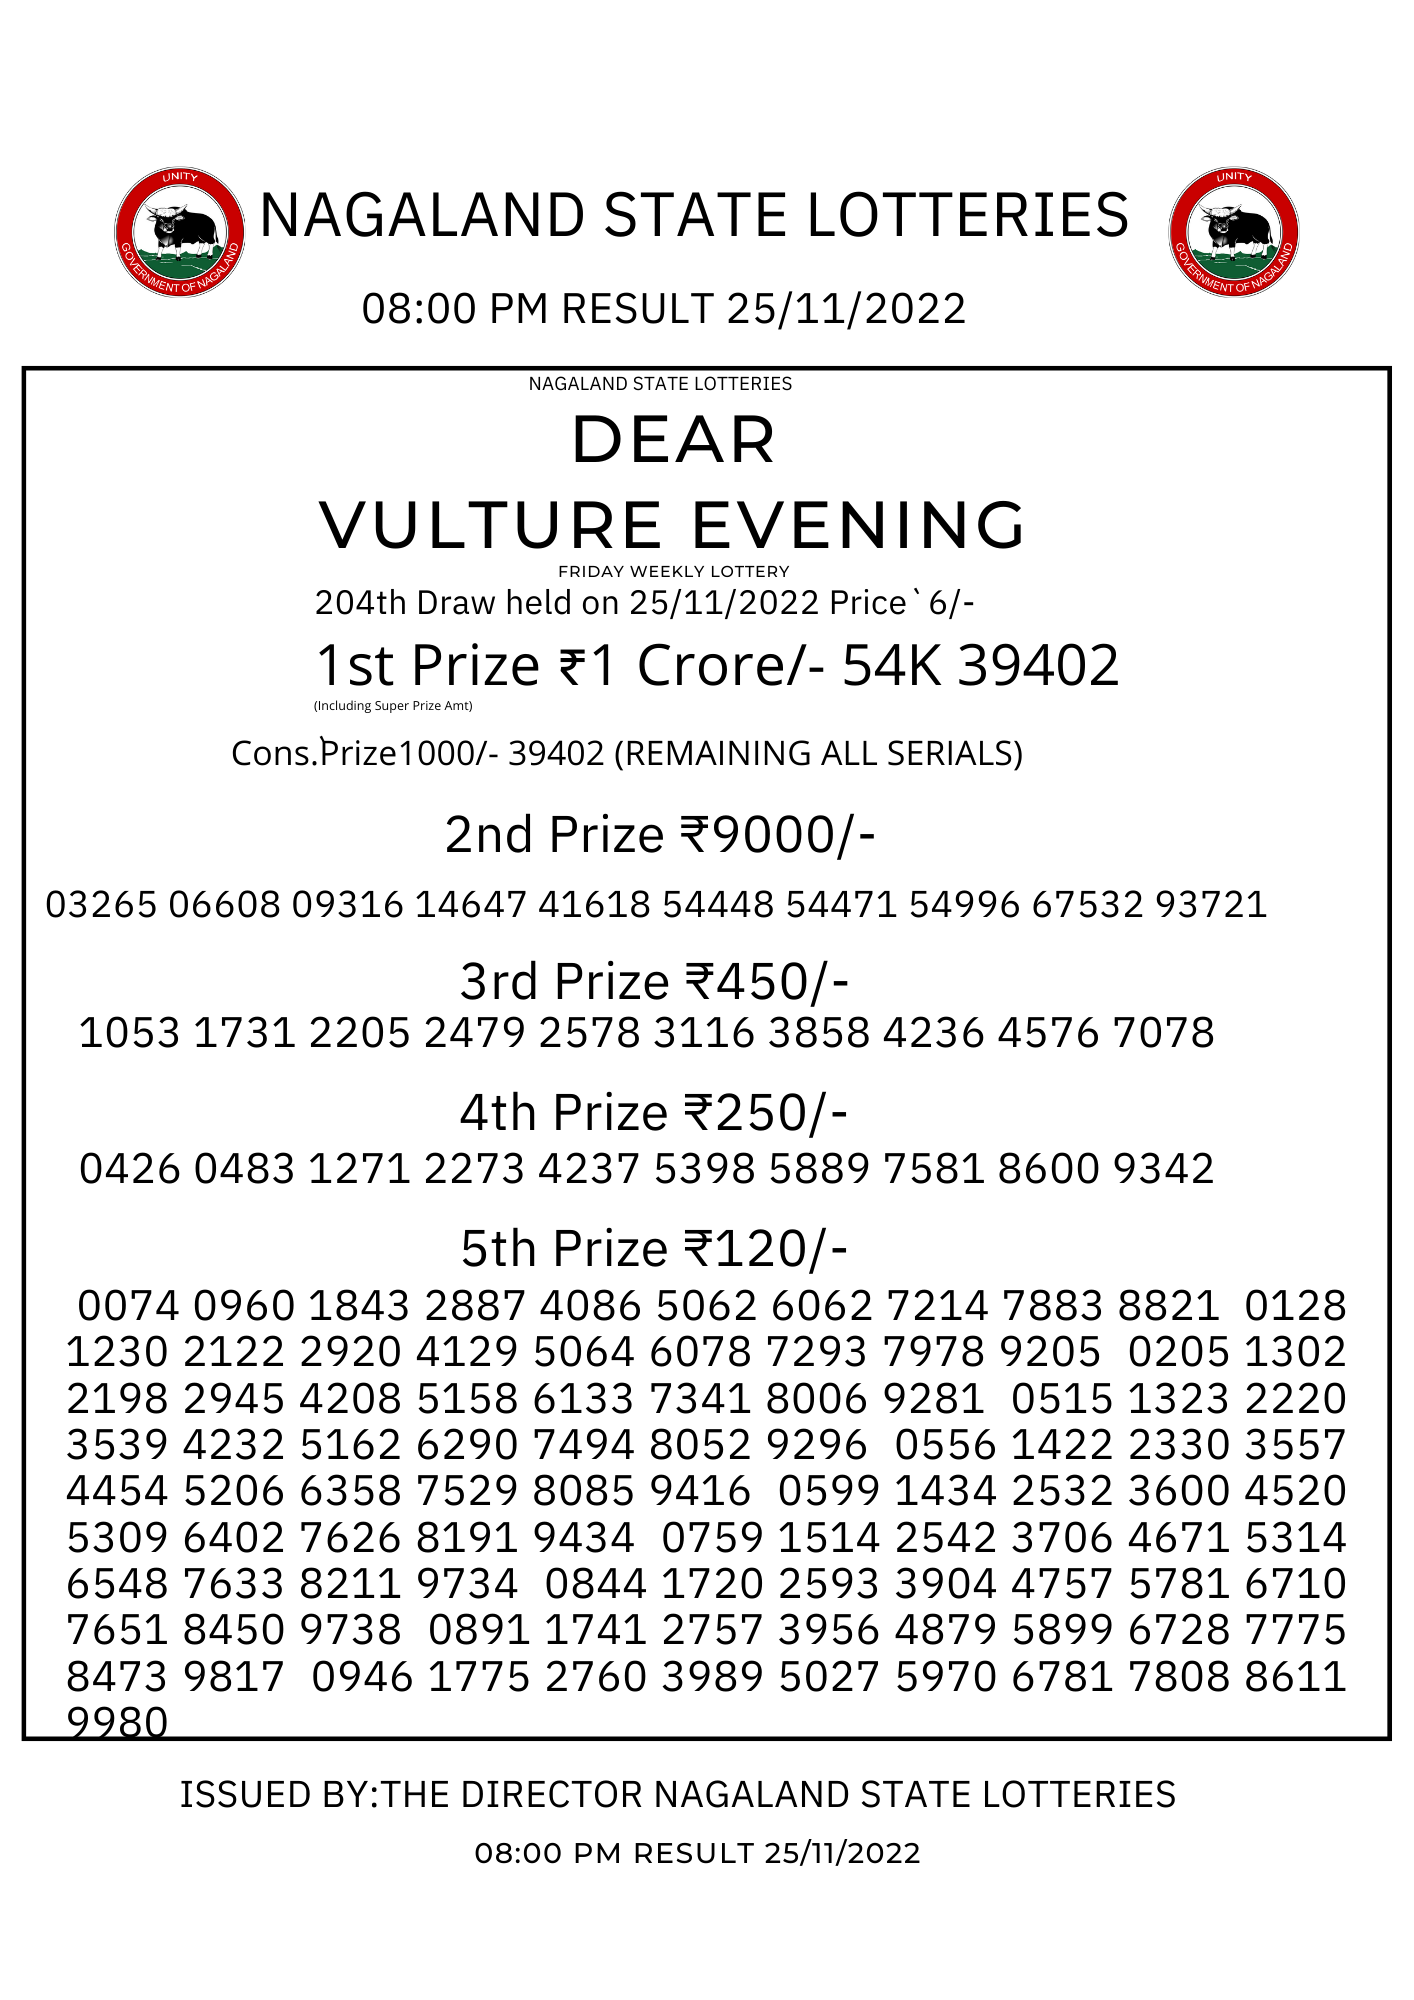 Nagaland Lottery results: Winning numbers of Dear Vulture Evening results